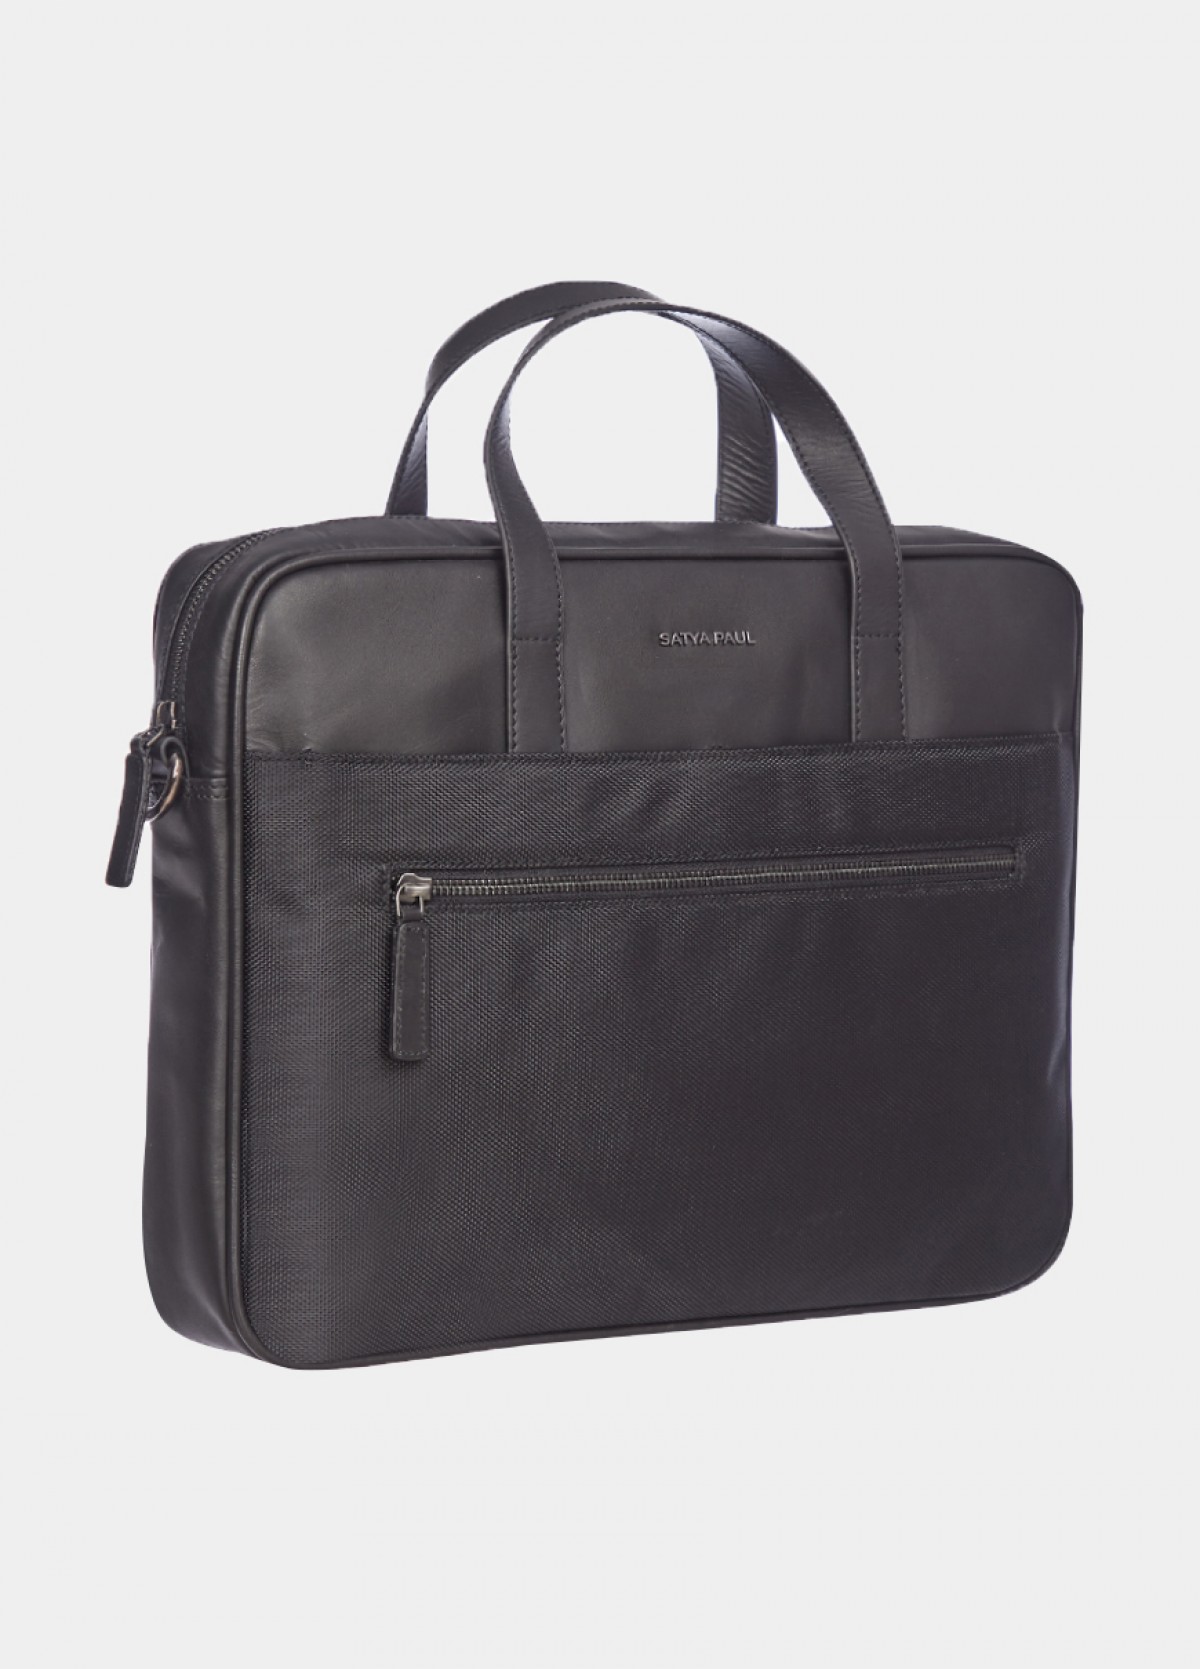 The Leather Laptop Bag